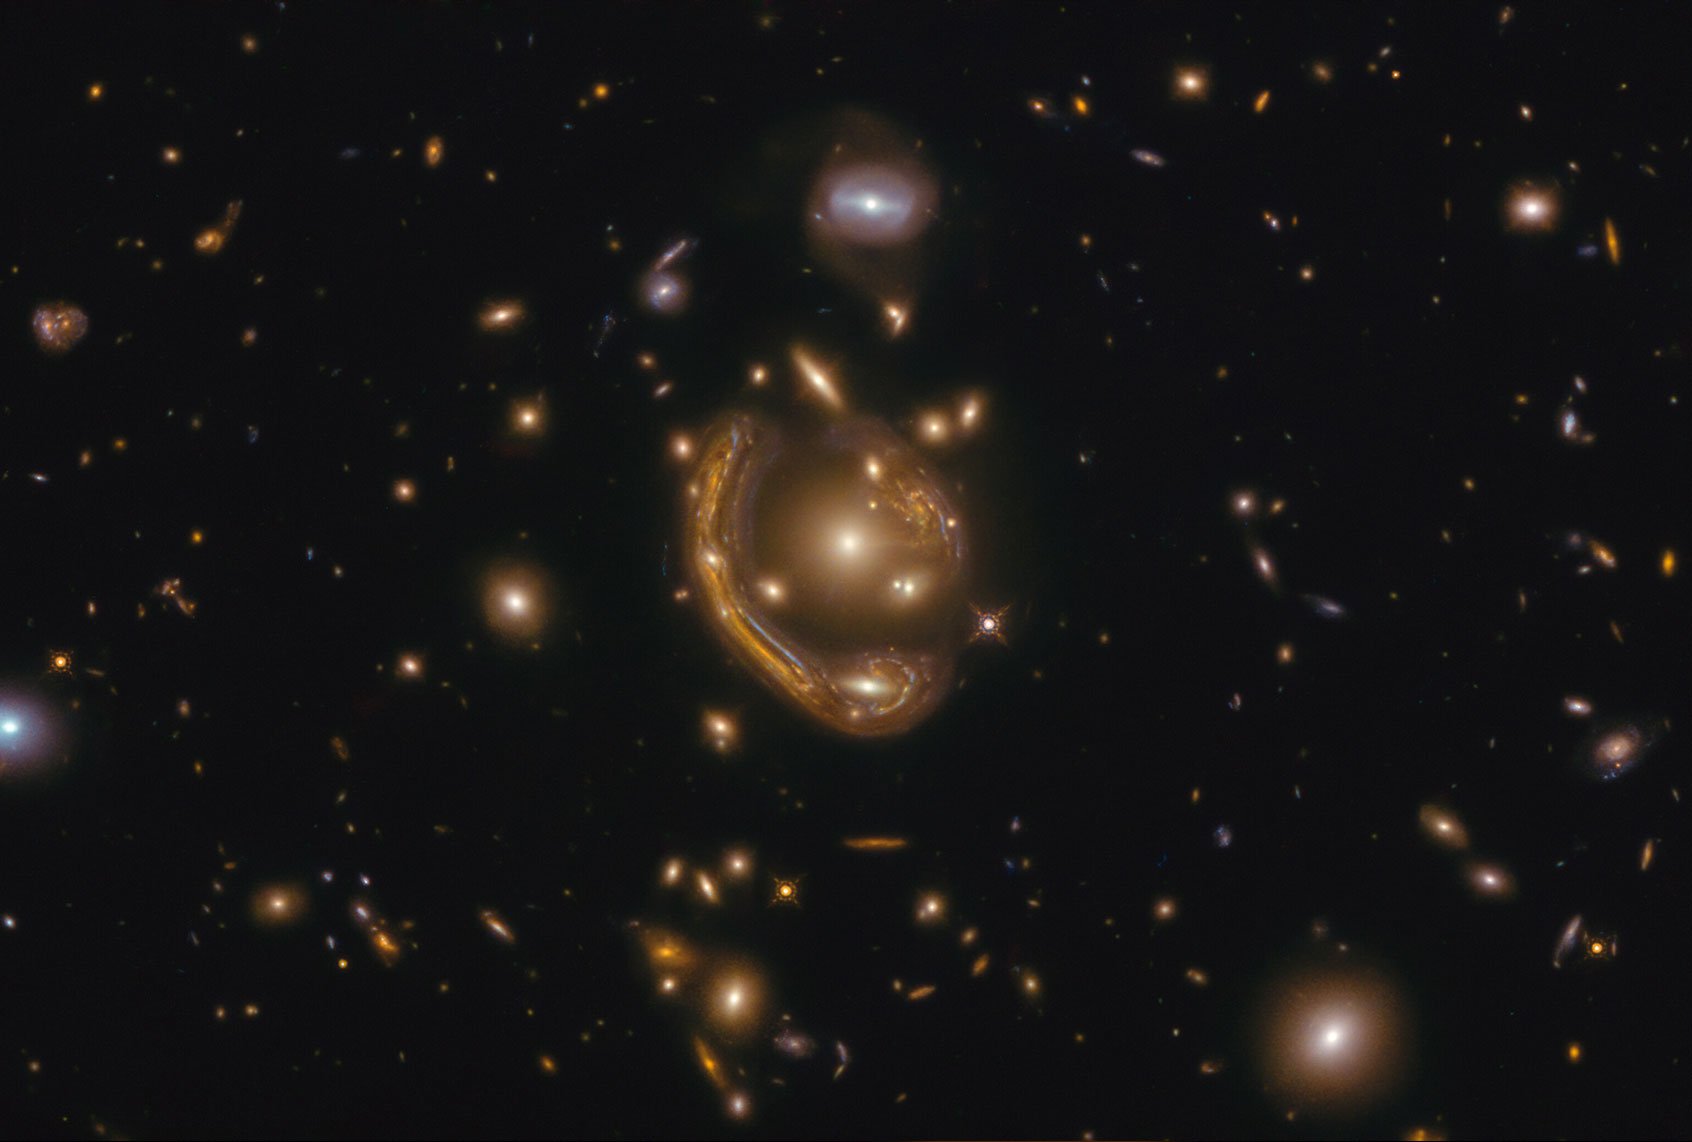 What was the "melted ring" that Hubble saw?